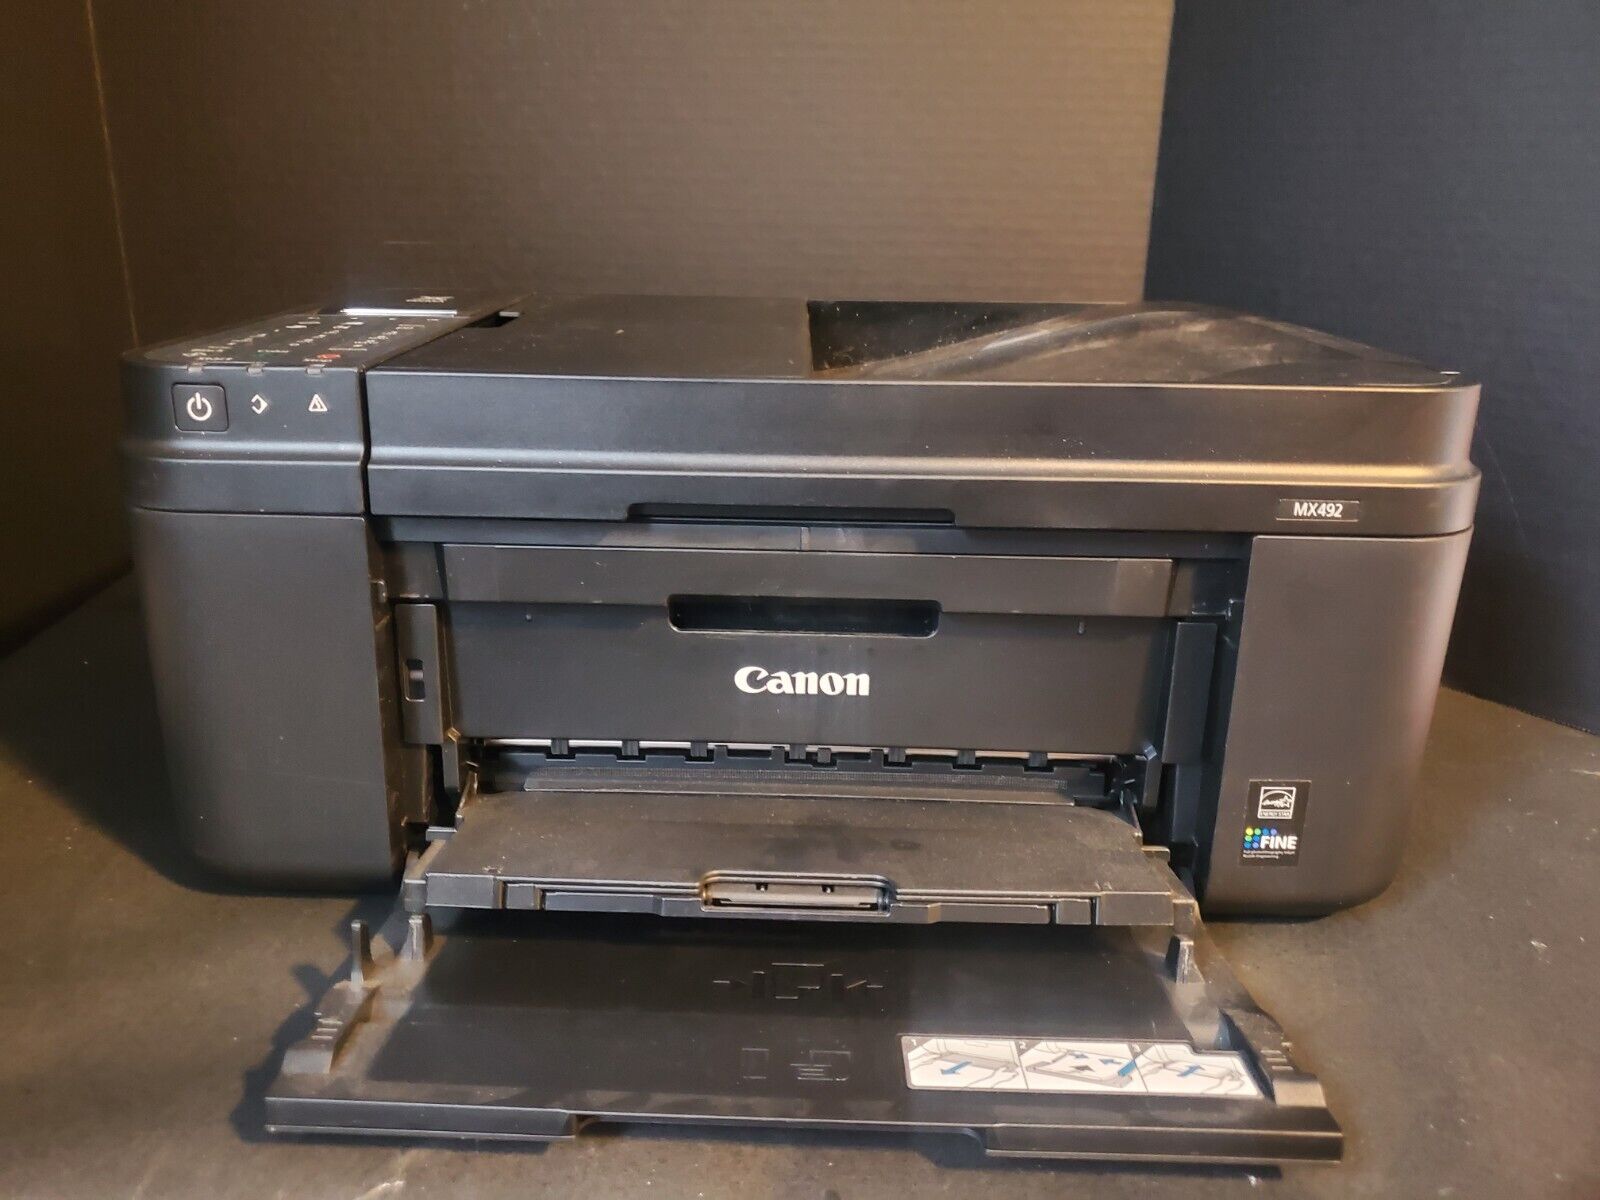 Canon Pixma MX490 All-In-One InkJet Printer - Black Used Tested Works Great